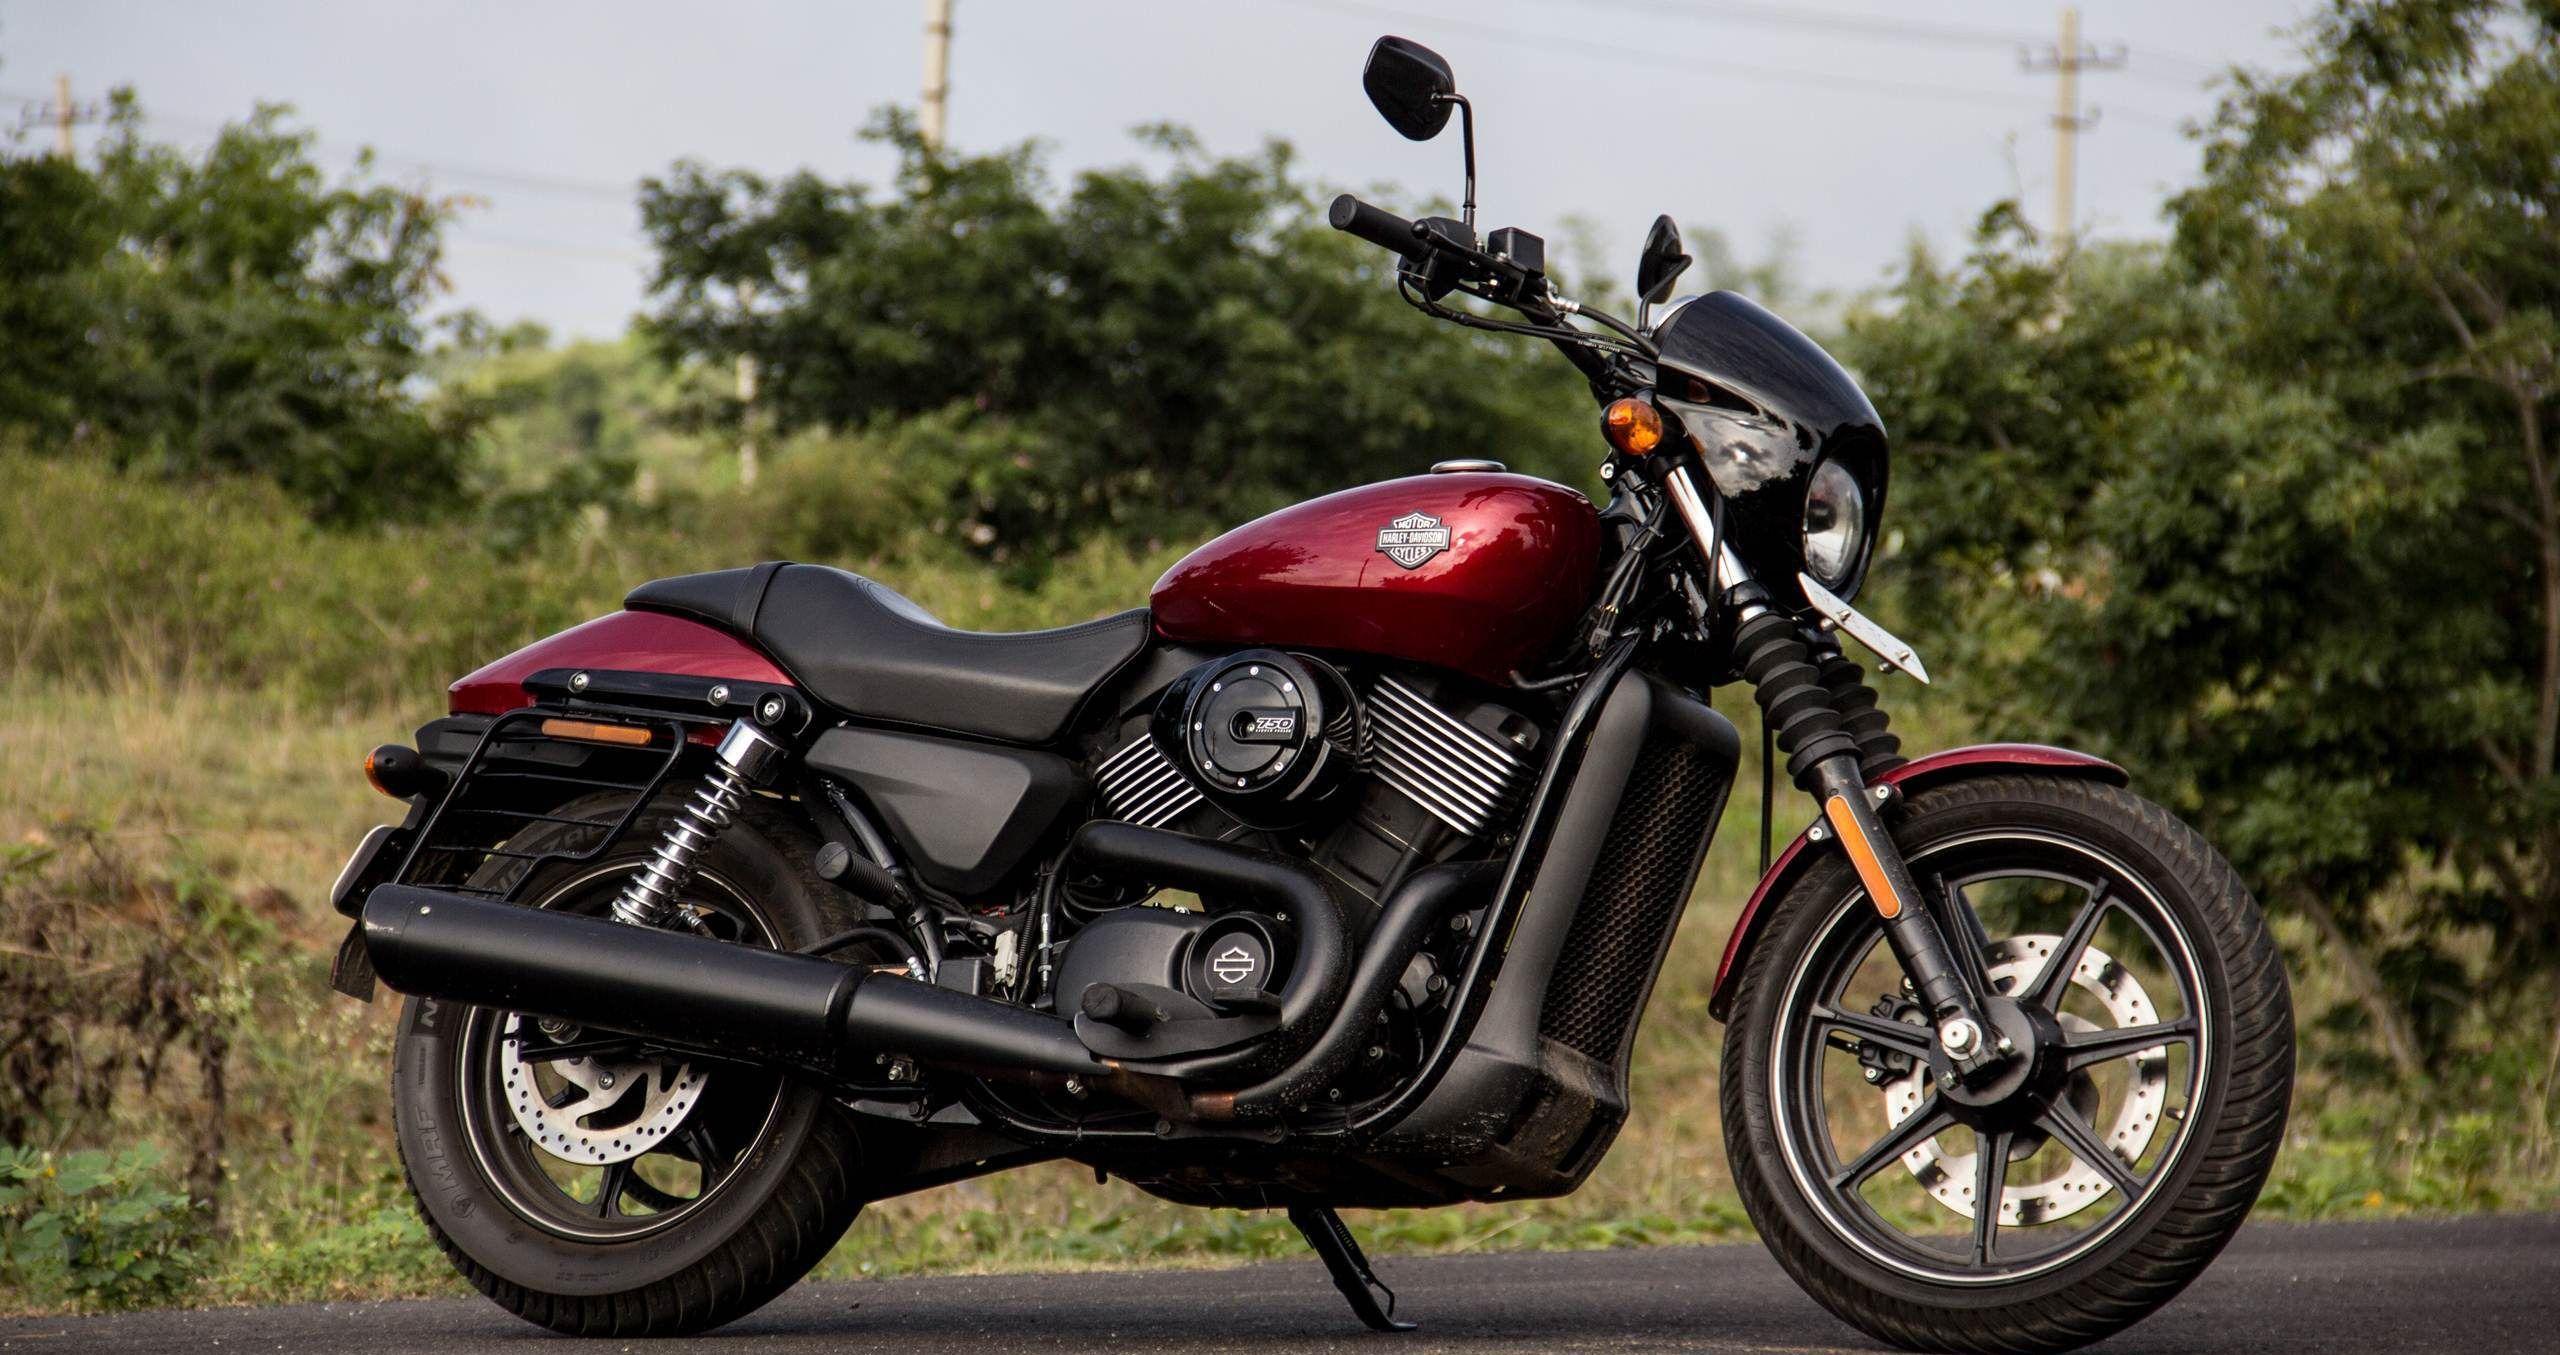 Alert: 2017 Harley Davidson Street 750 Introduced with ABS